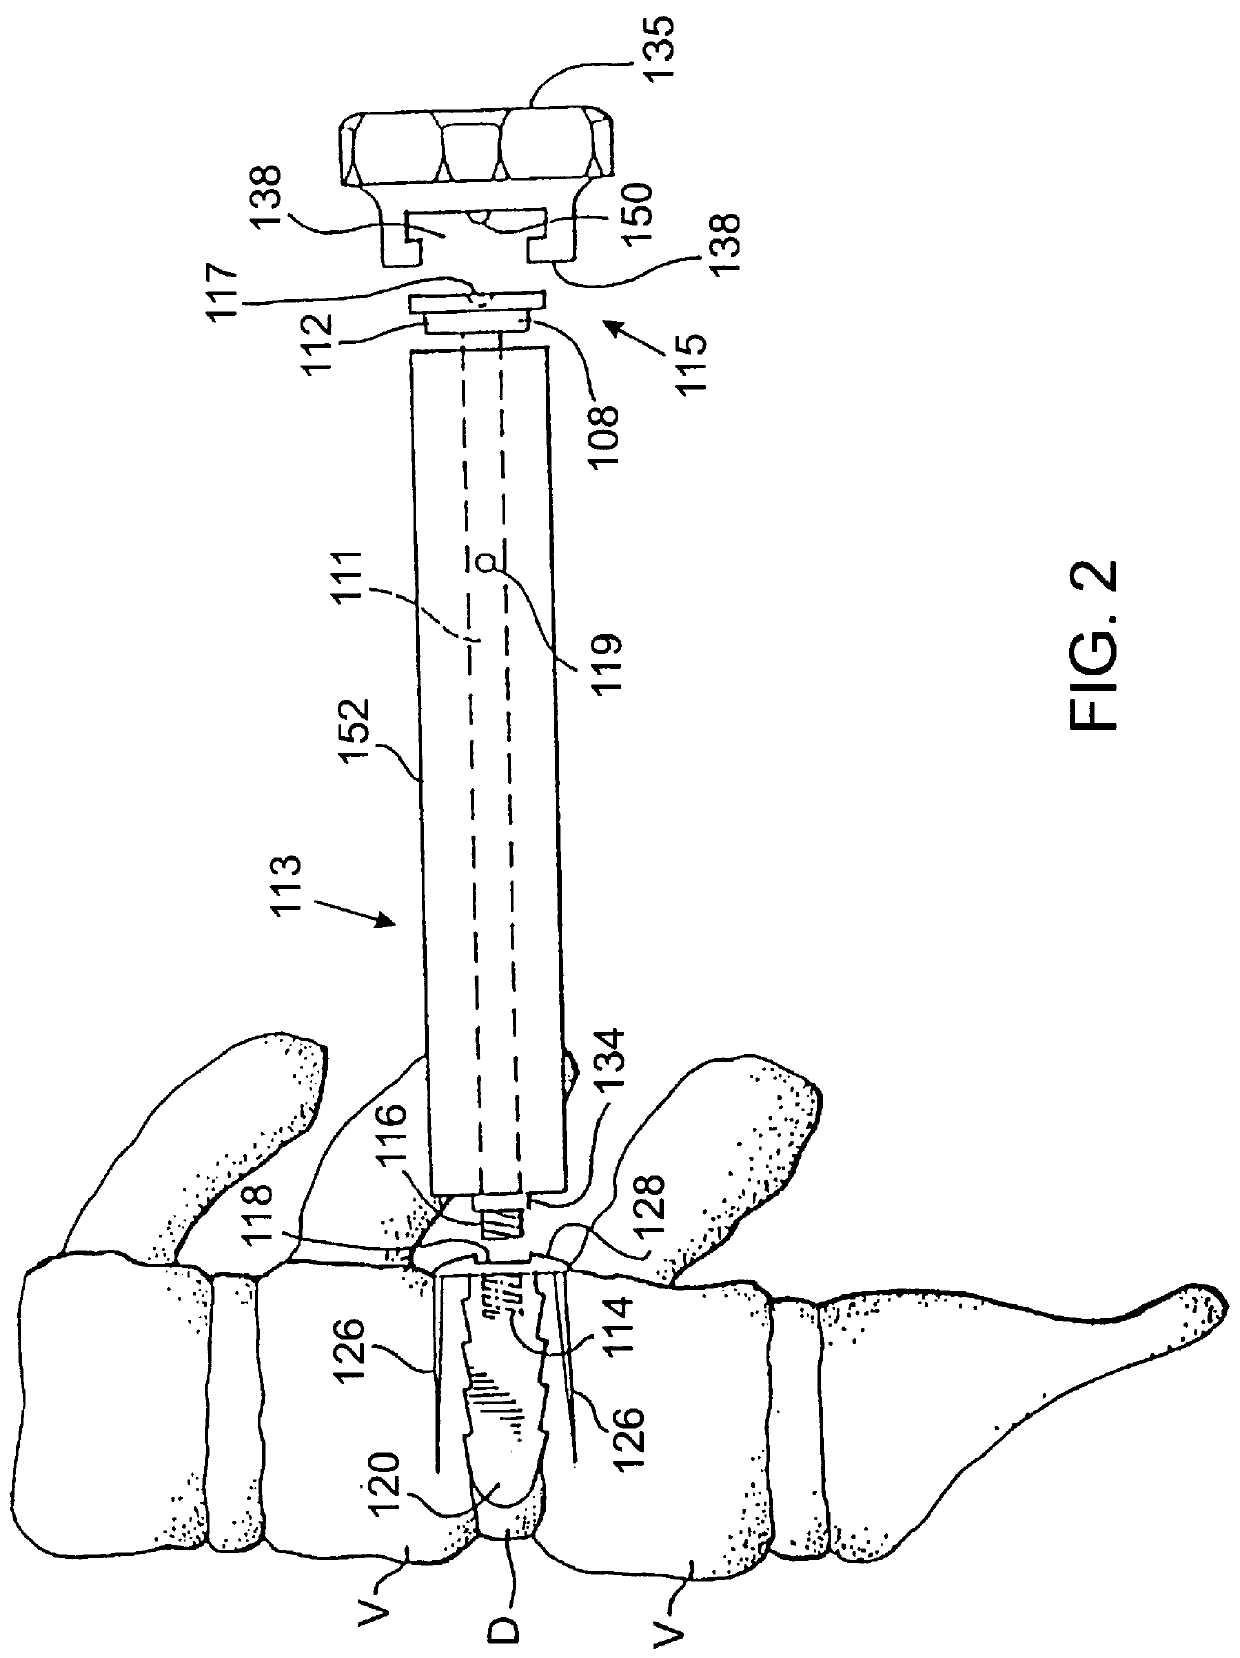 Method of inserting and preloading spinal implants